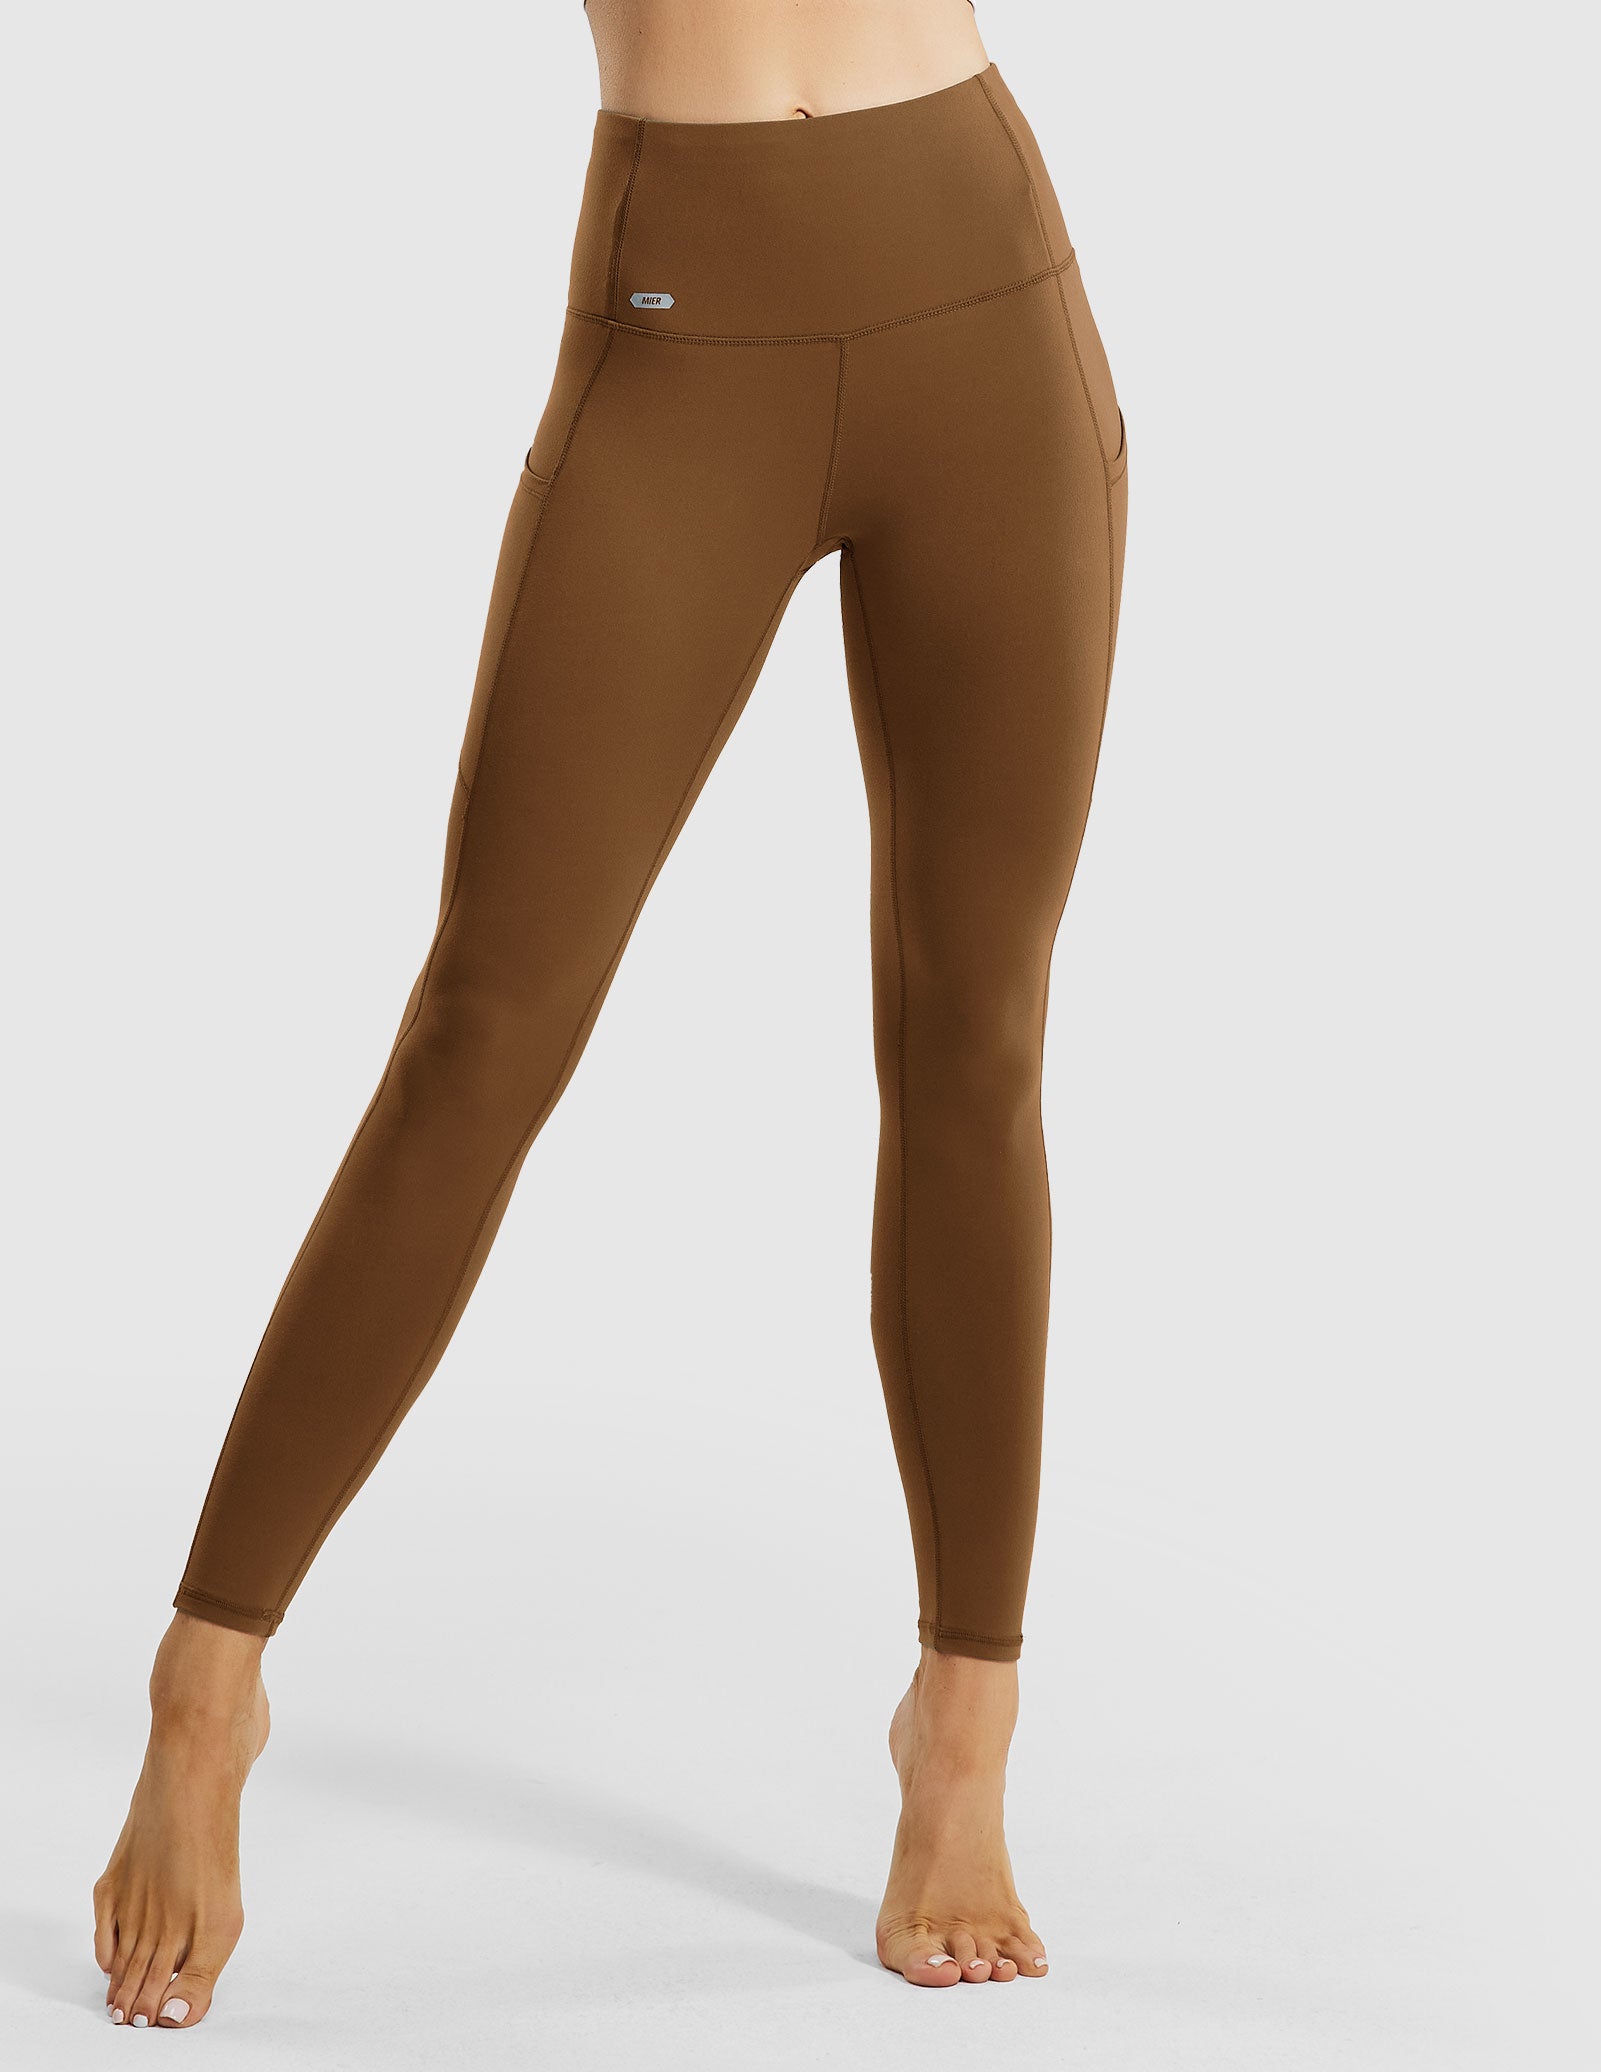 Share more than 57 brown workout leggings